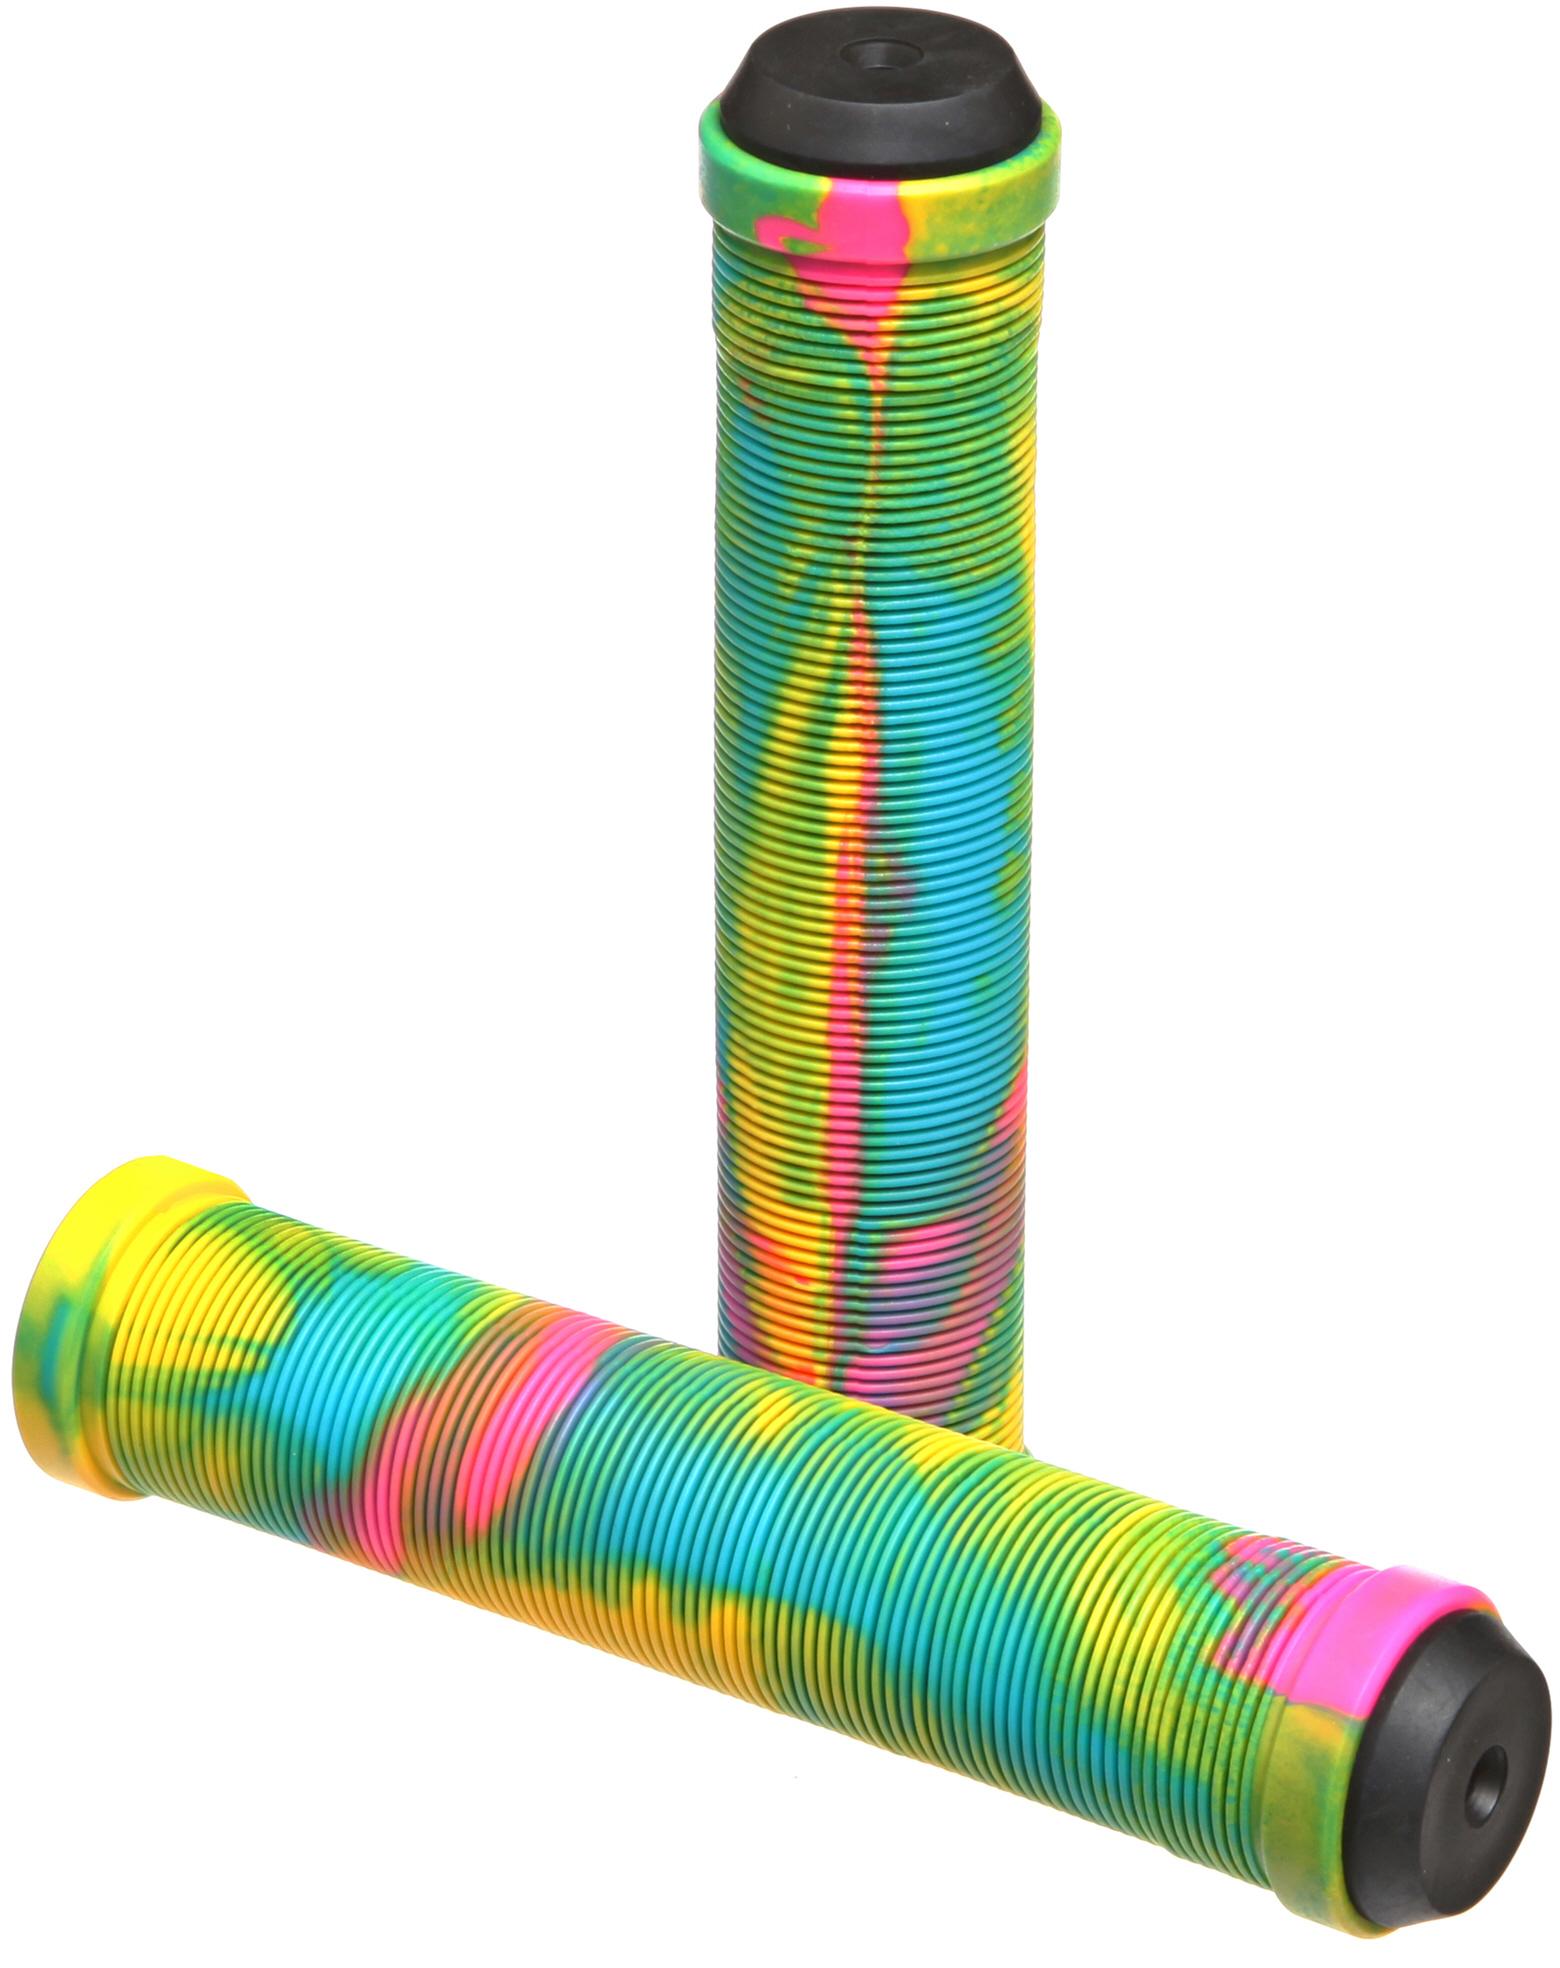 Seal Bmx Switch Grips - Limited Edition - Tie Dye